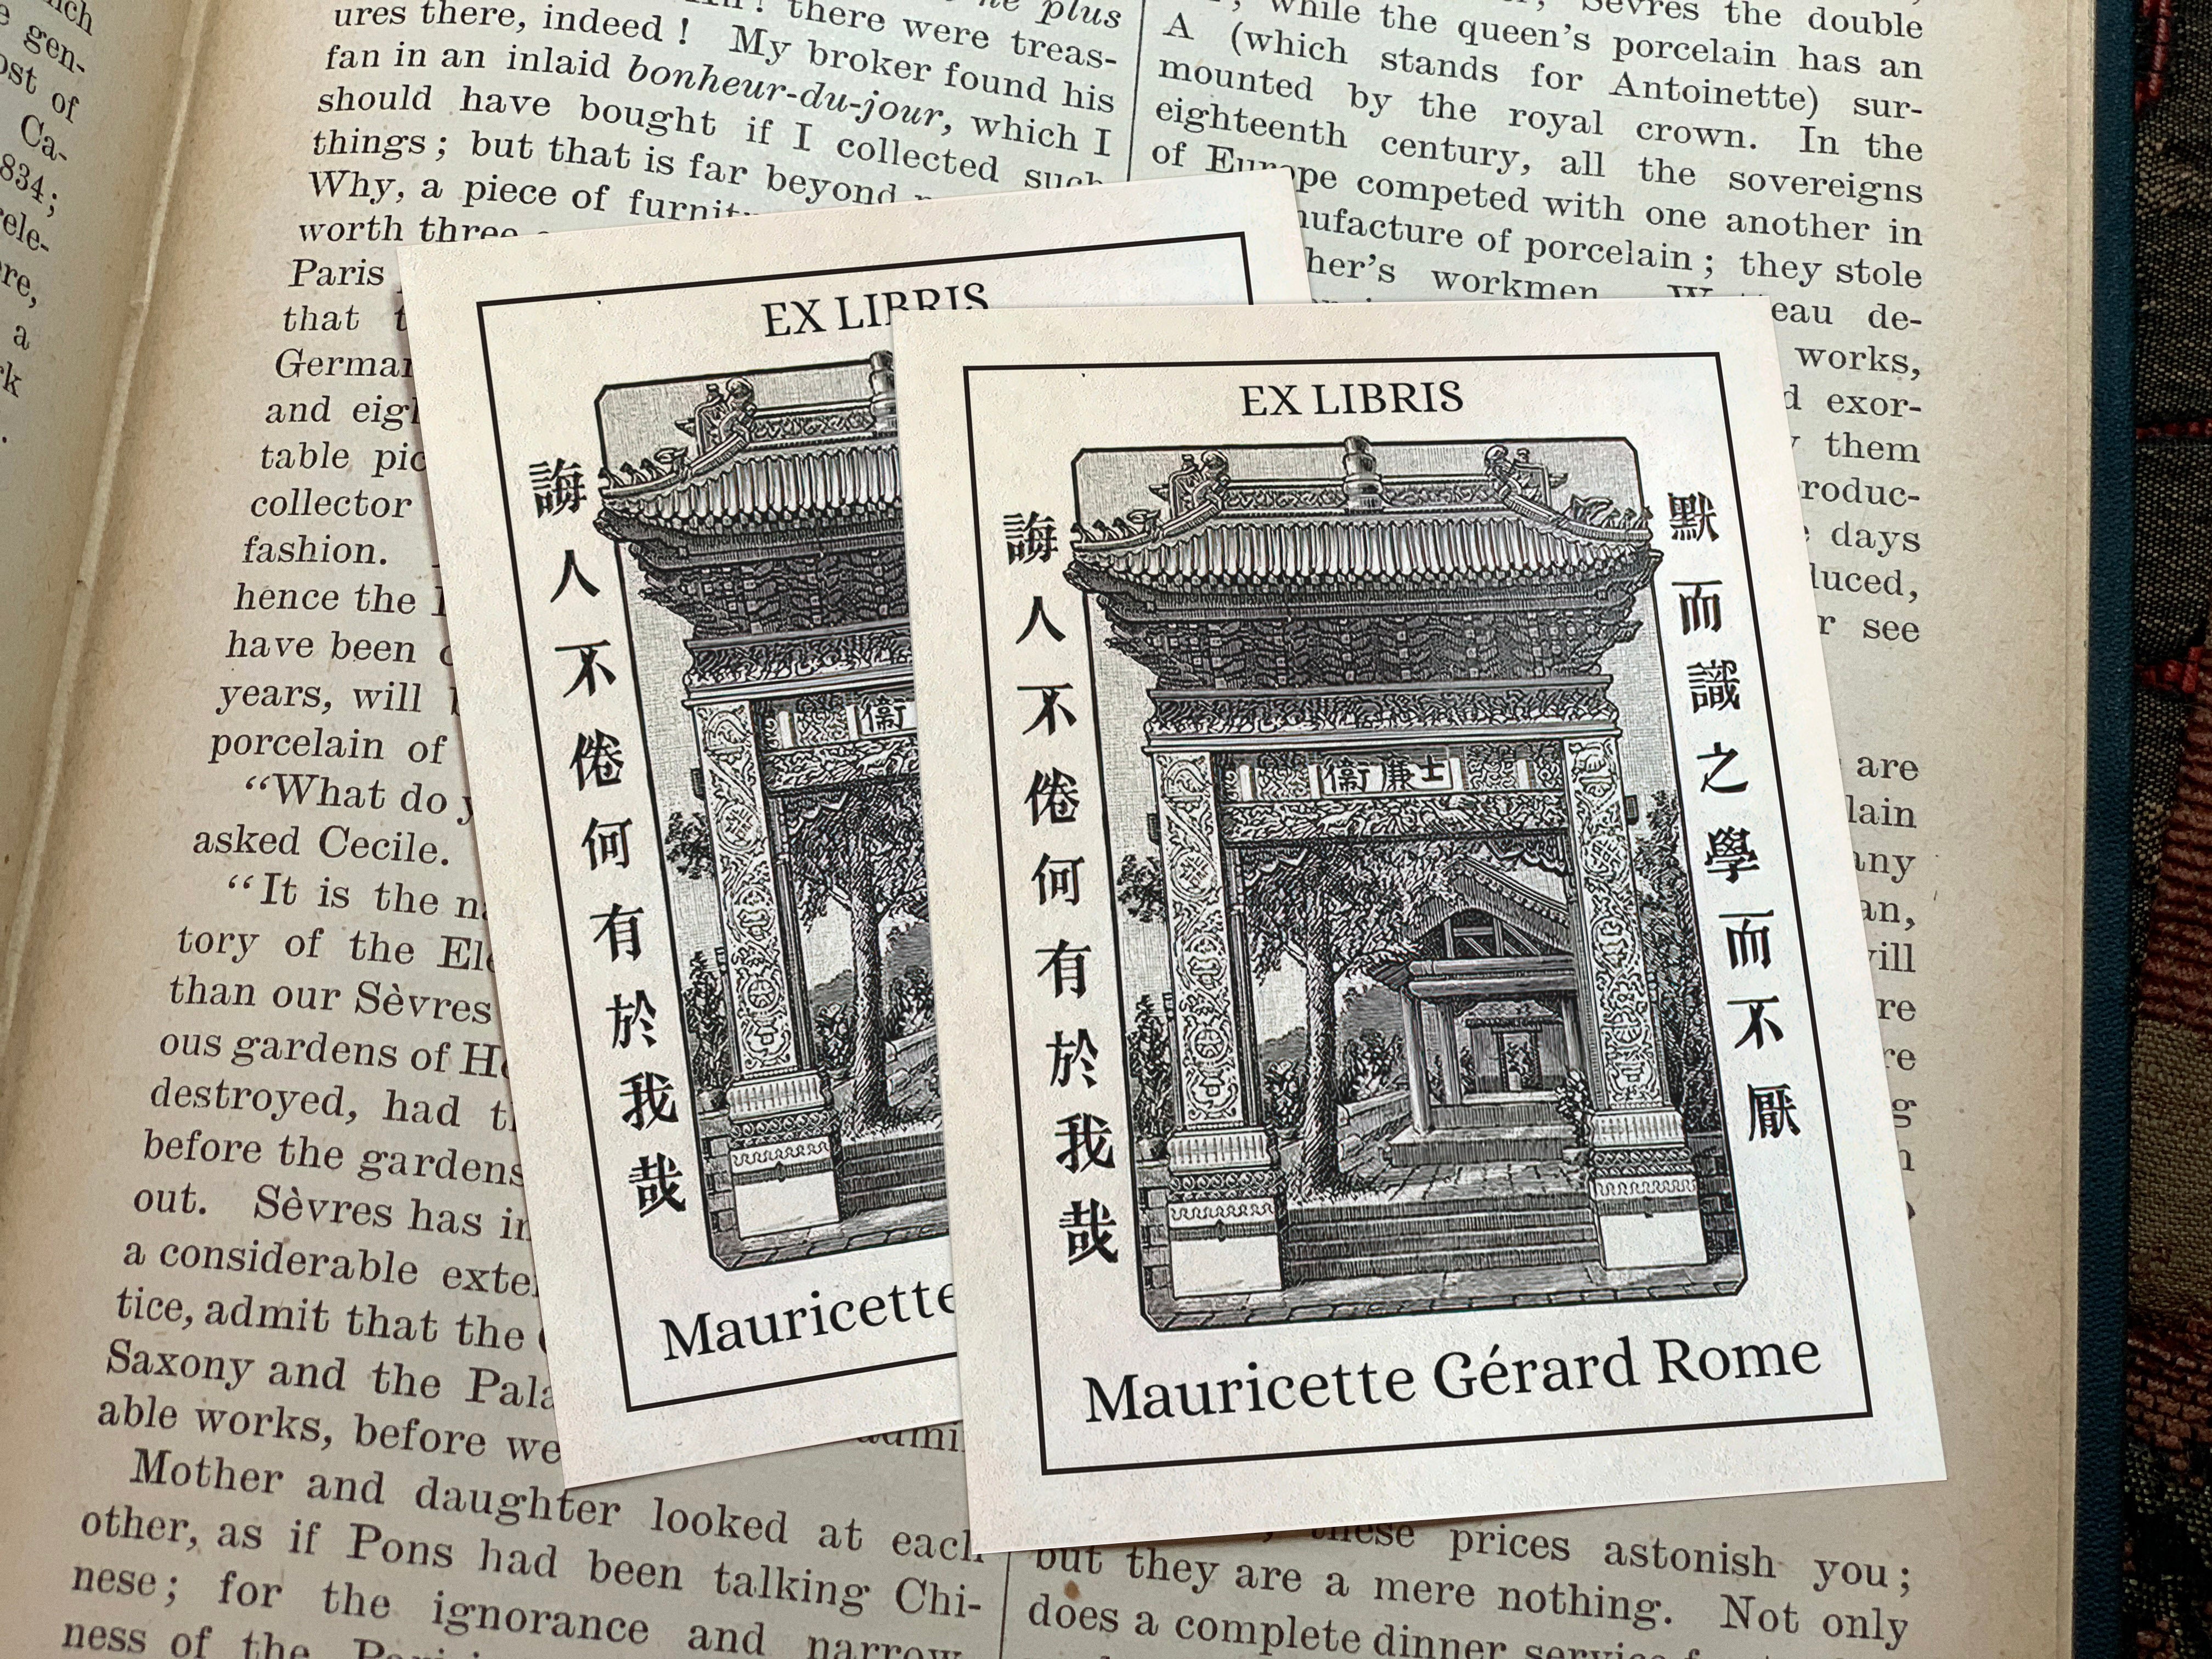 Confucius Temple, Personalized Ex-Libris Bookplates, Crafted on Traditional Gummed Paper, 3in x 4in, Set of 30